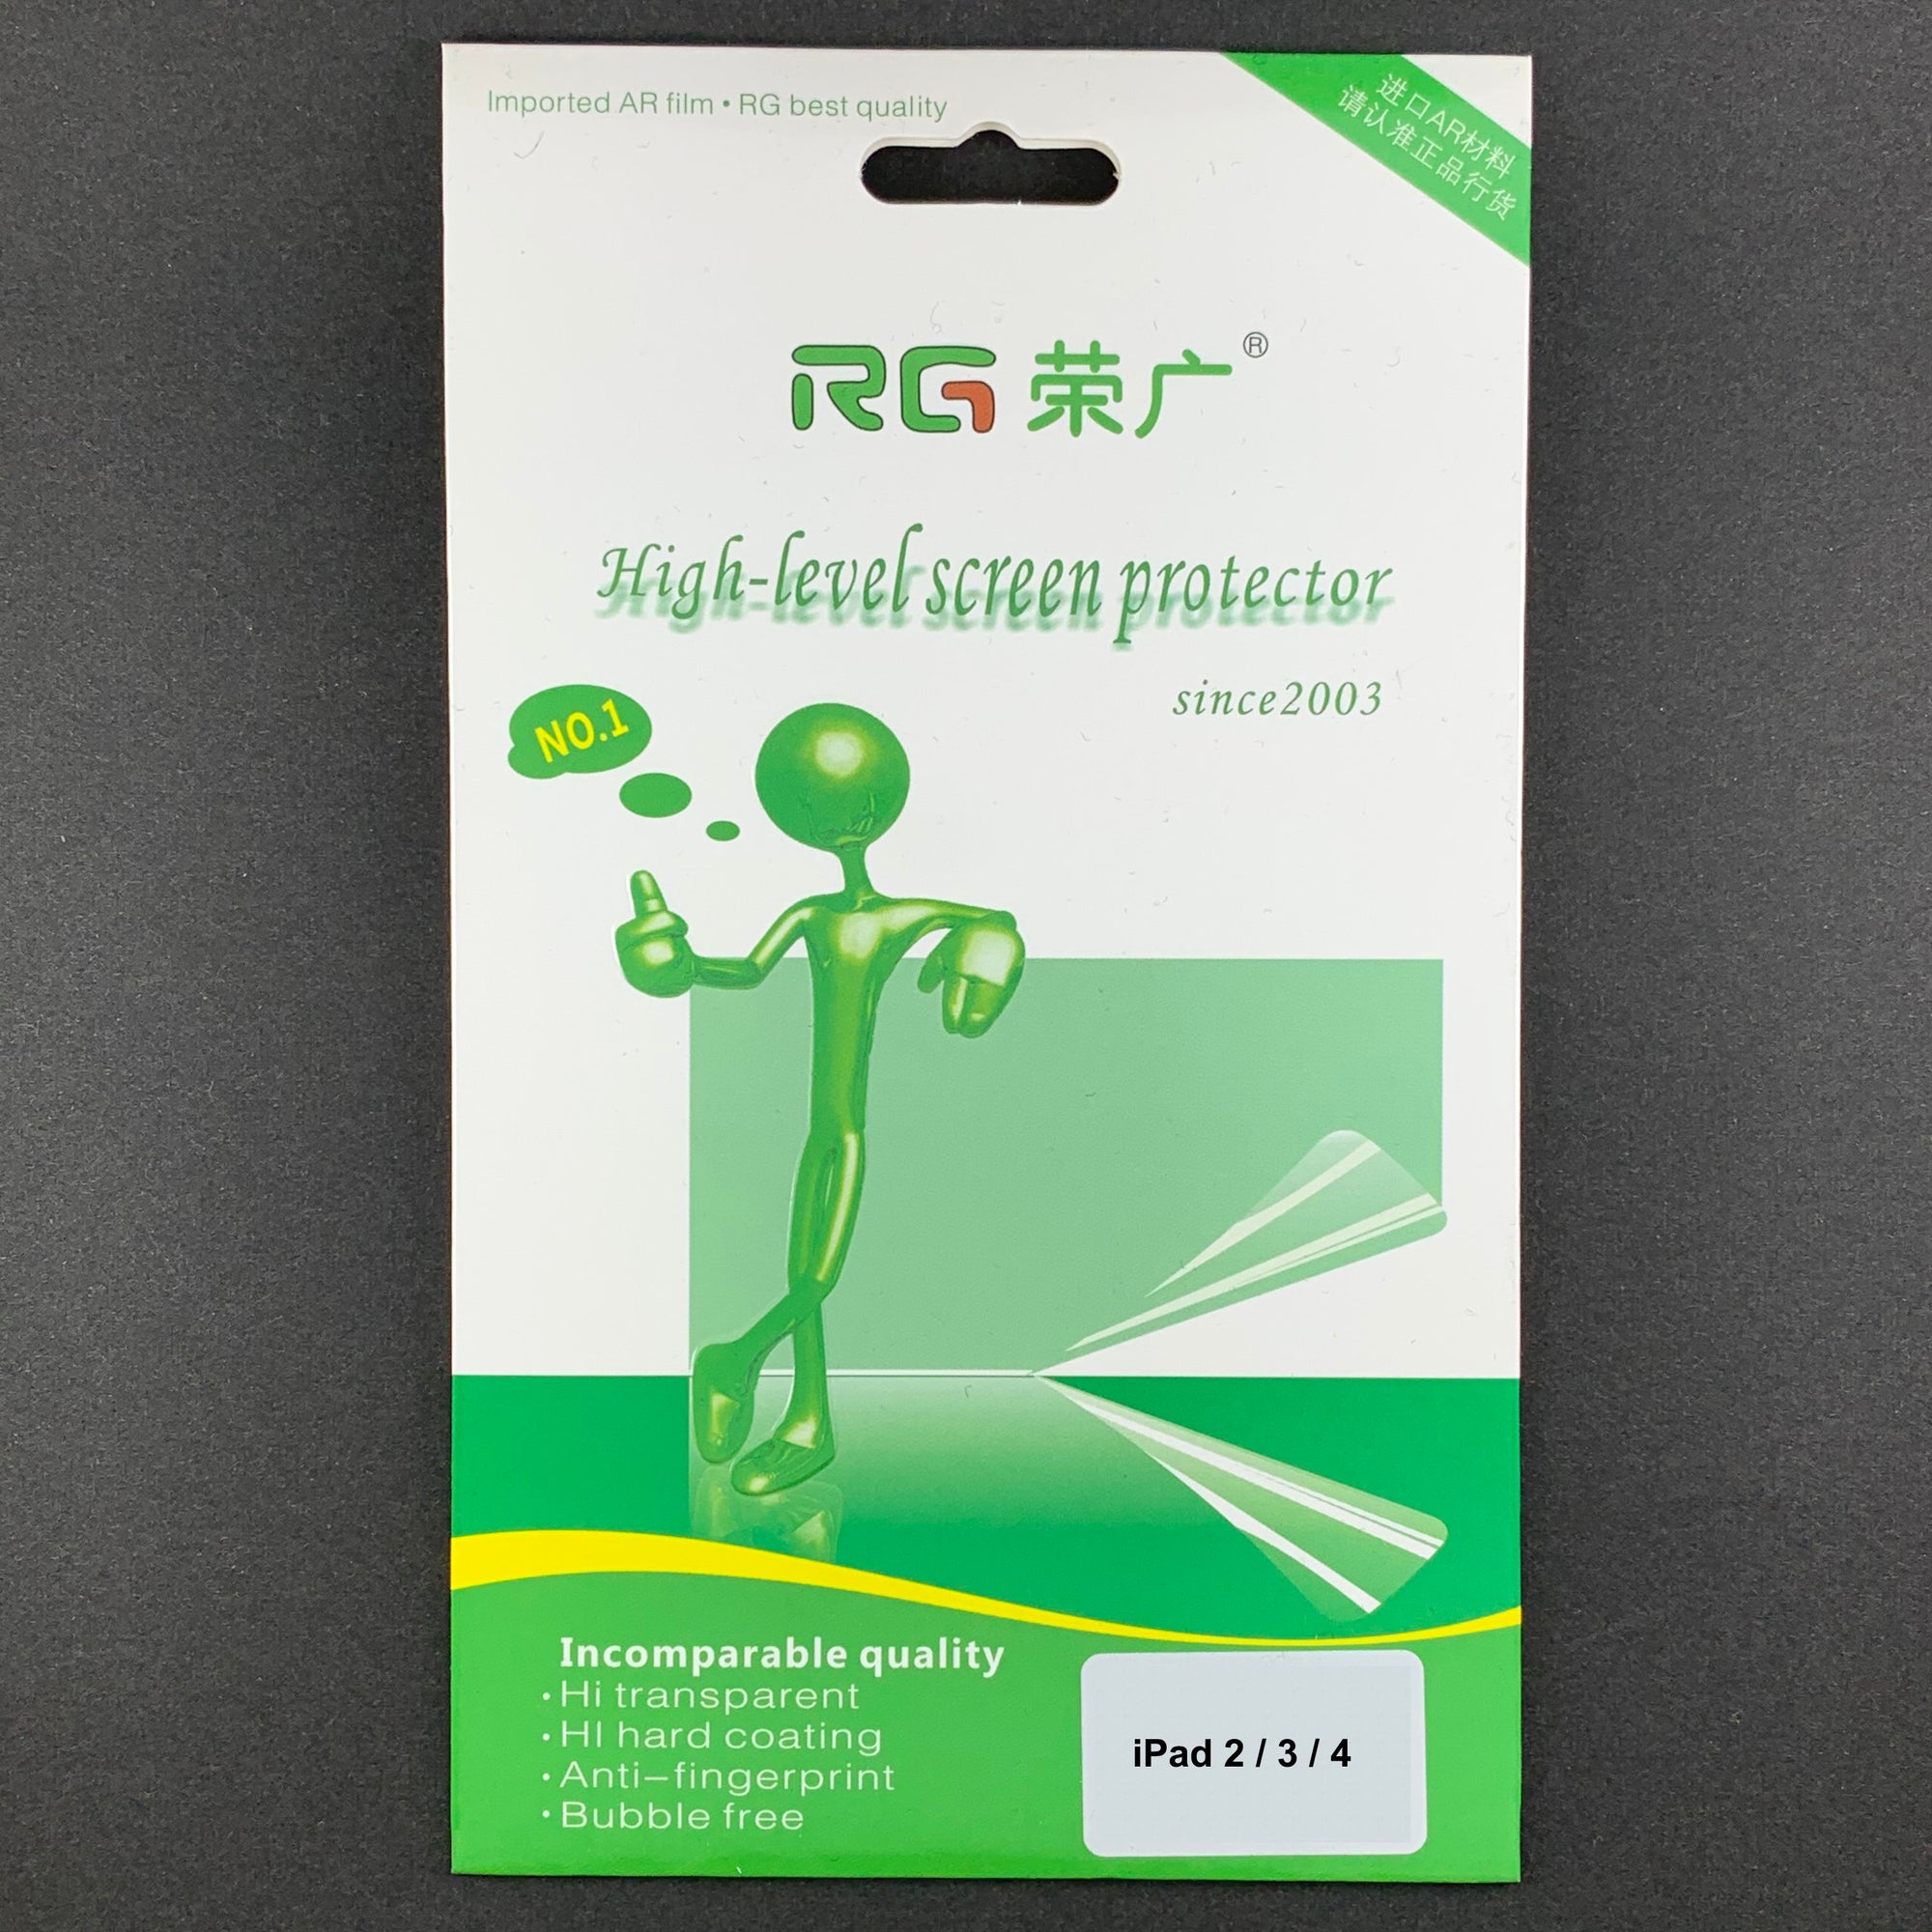 RG Professional Soft Film Screen Protector for iPad 2 / 3 / 4 (CLEAR, 2-PACK)